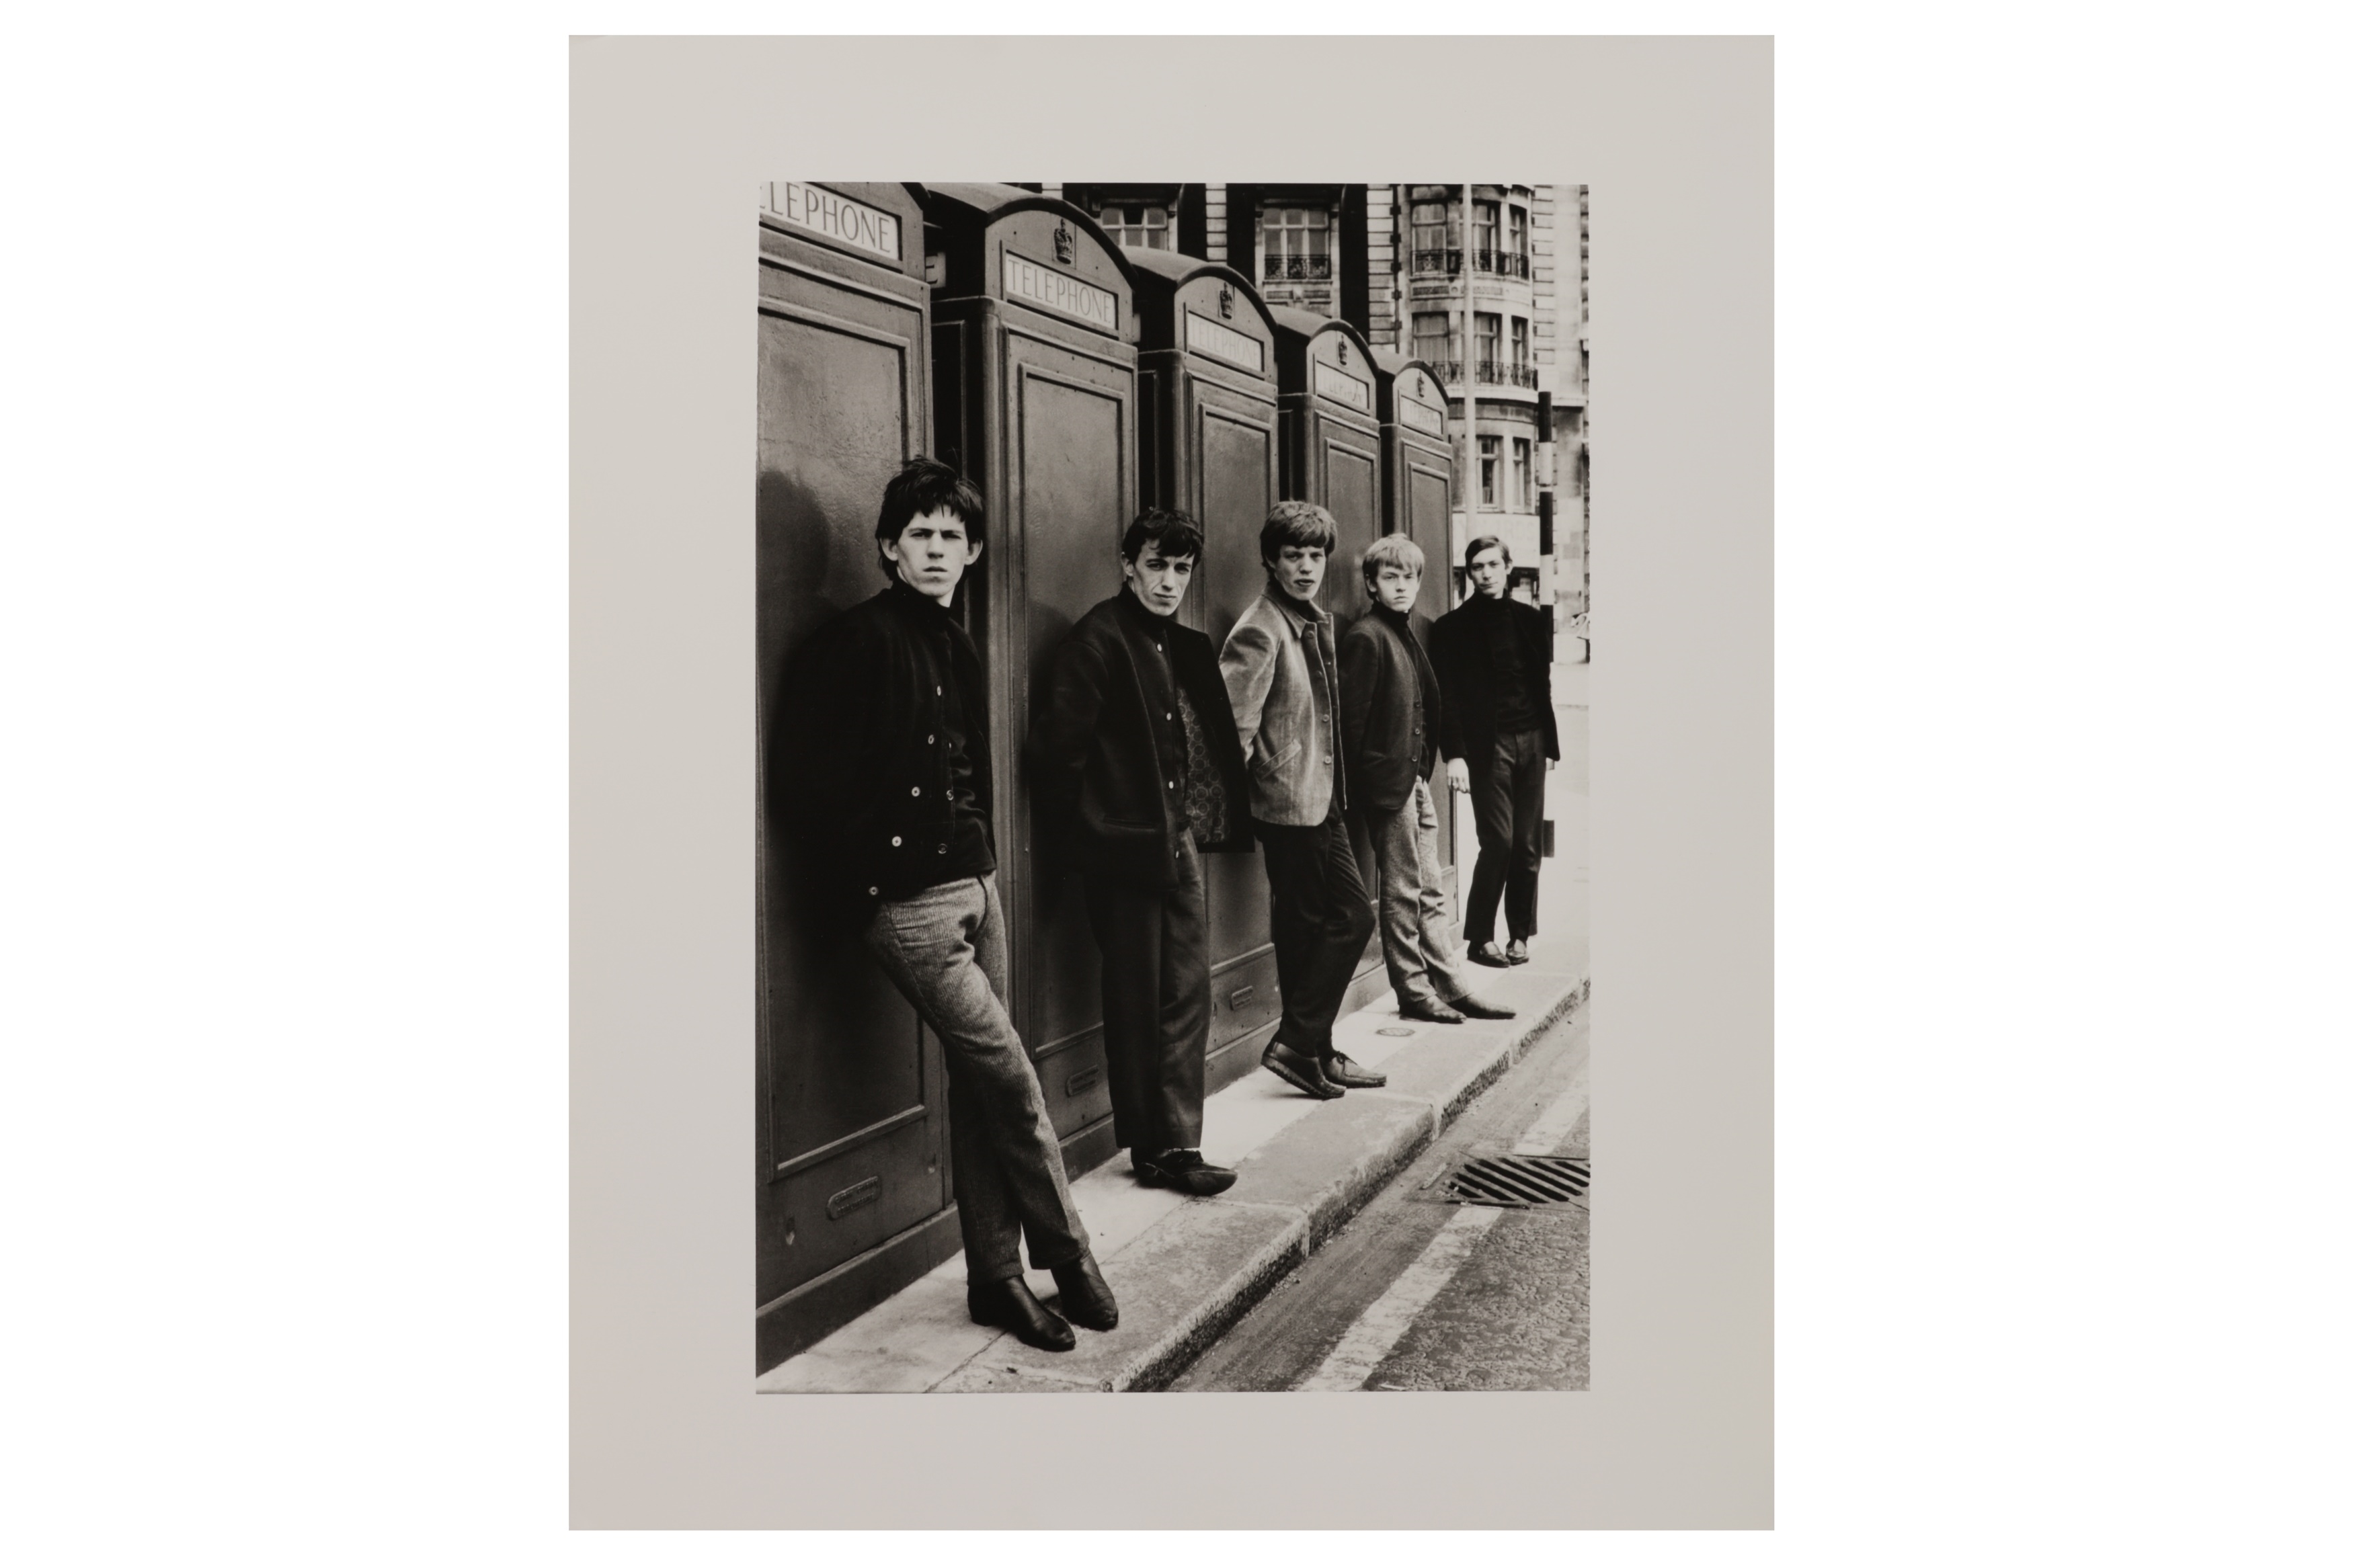 Artwork by Philip Townsend, THE ROLLING STONES - FIRST TIME 1963, Made of silver gelatin print